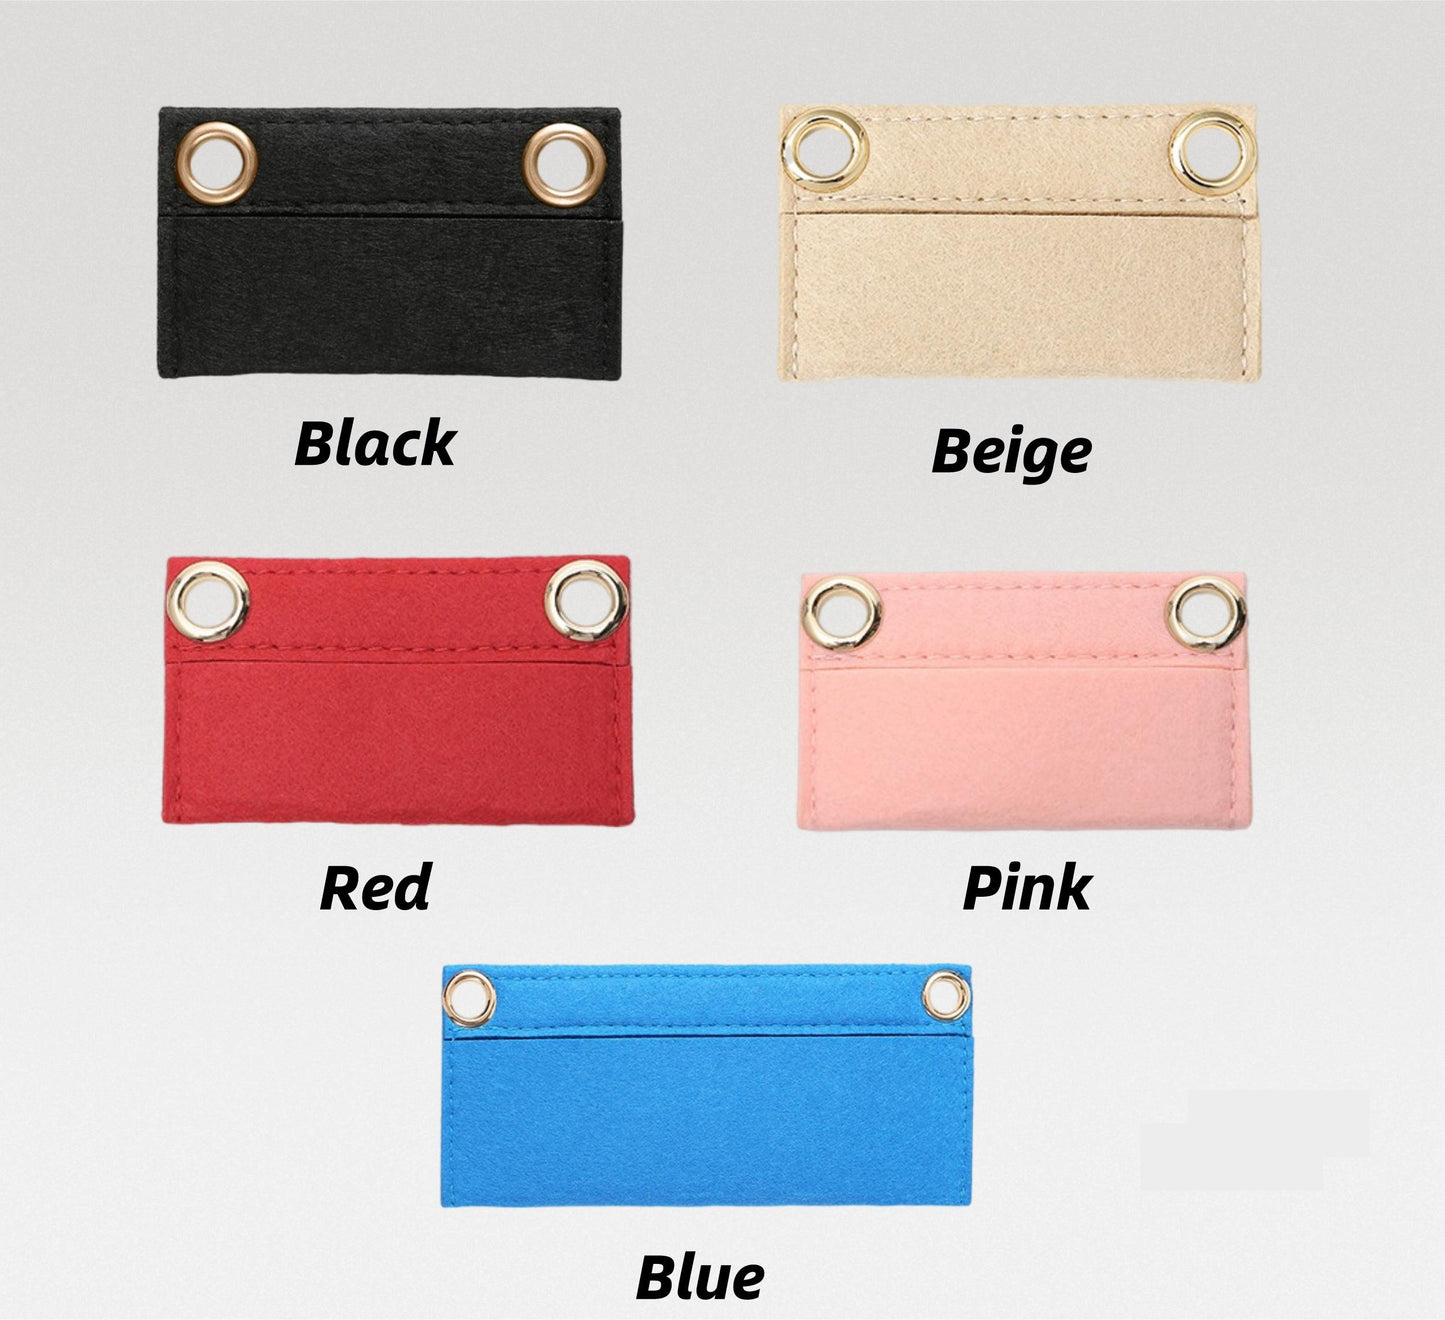 Dauphine Compact Wallet Conversion Kit (Felt Insert with Chain) | Wallet Insert and Chain | Wallet convert to Crossbody bag